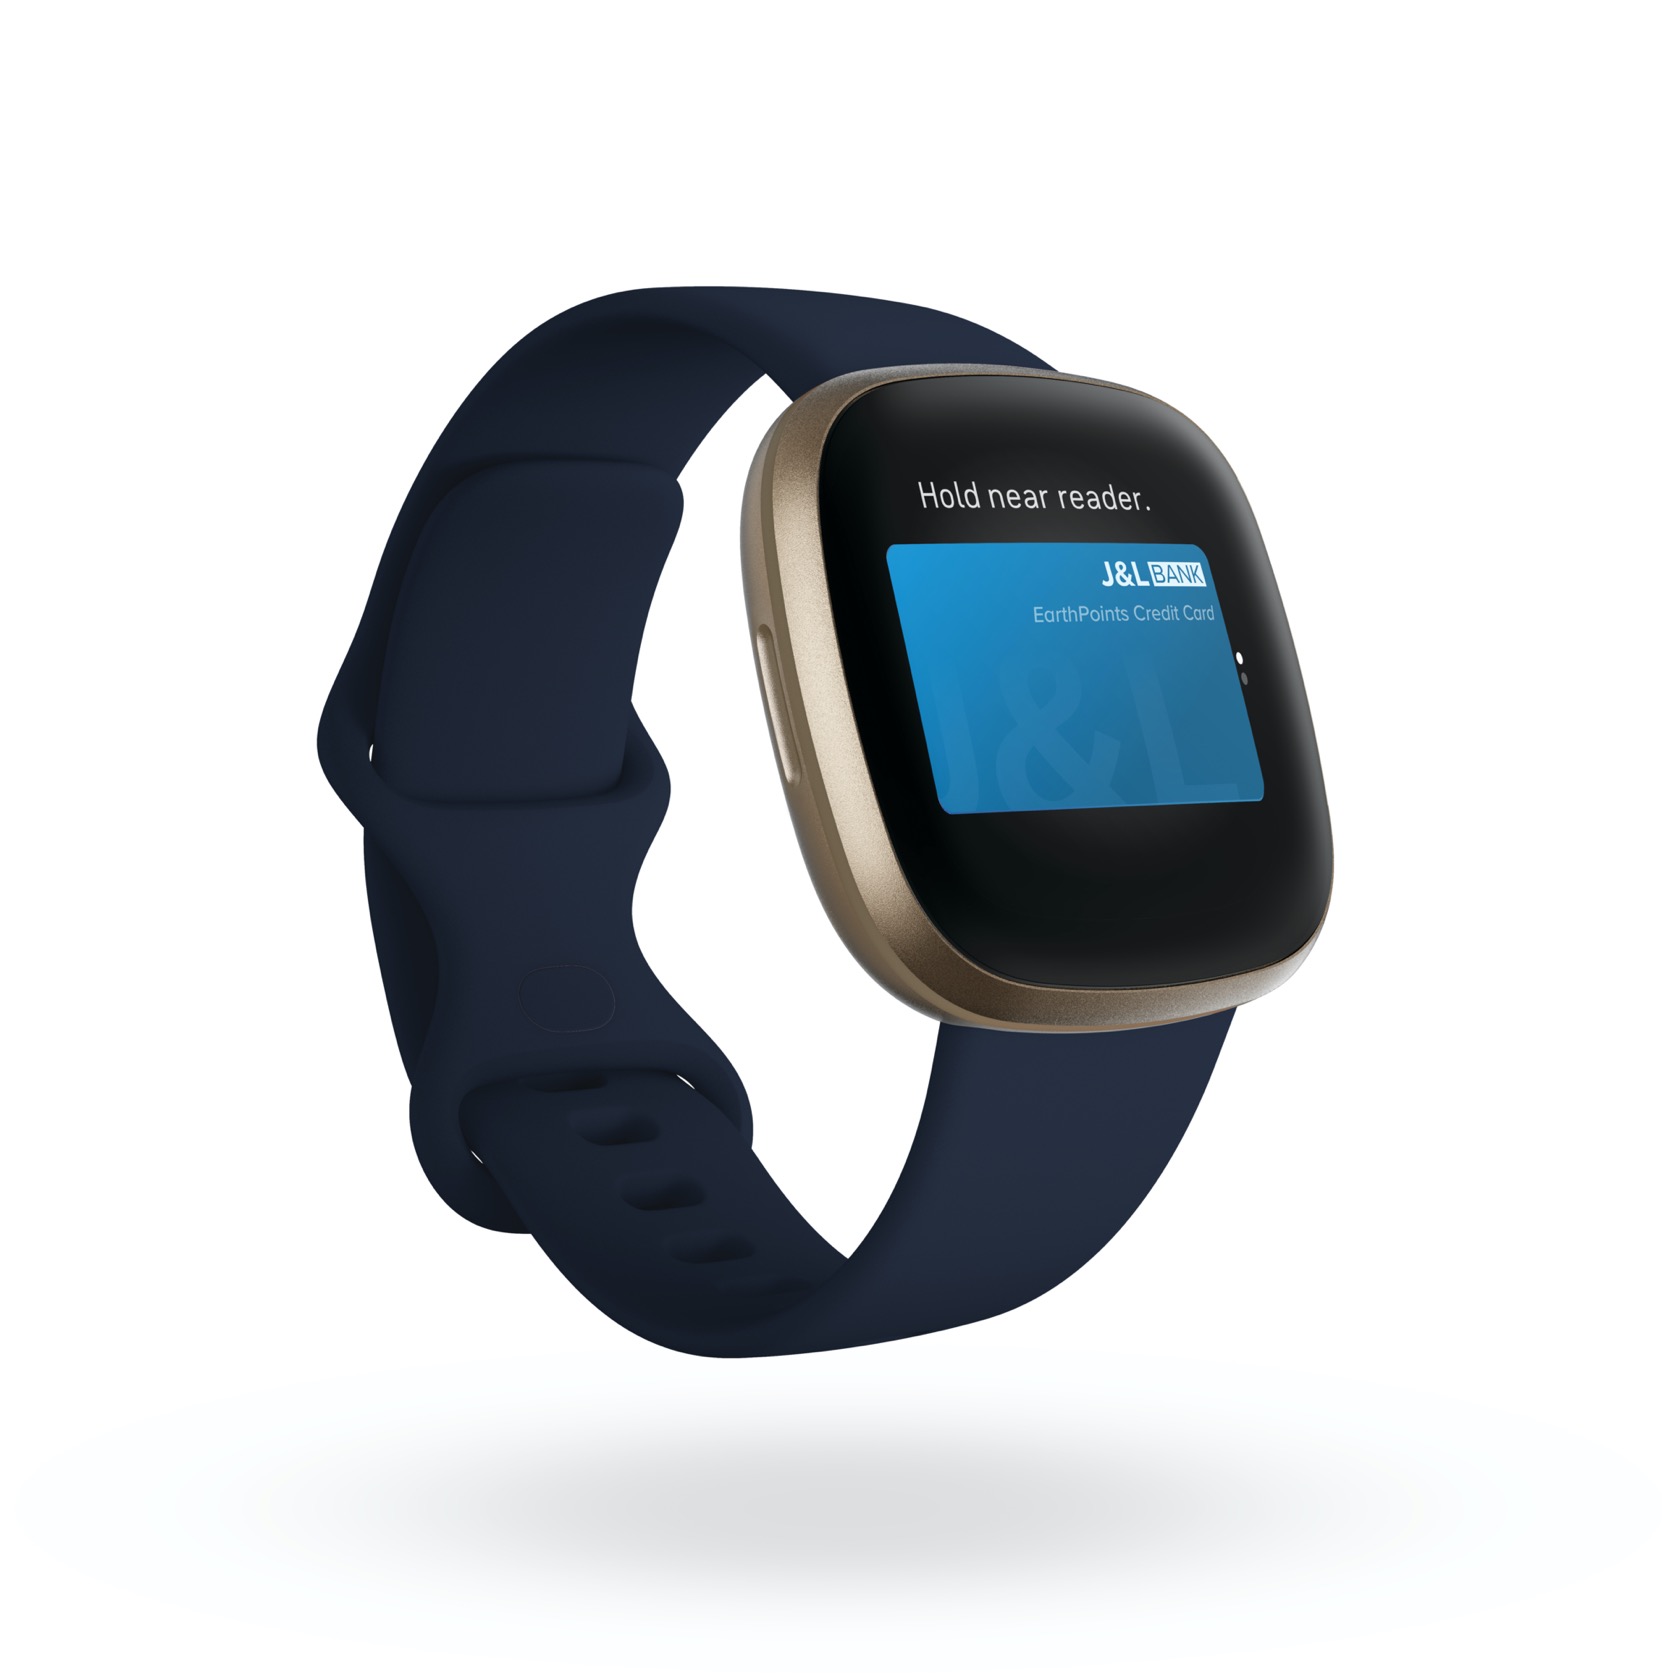 which fitbits have fitbit pay